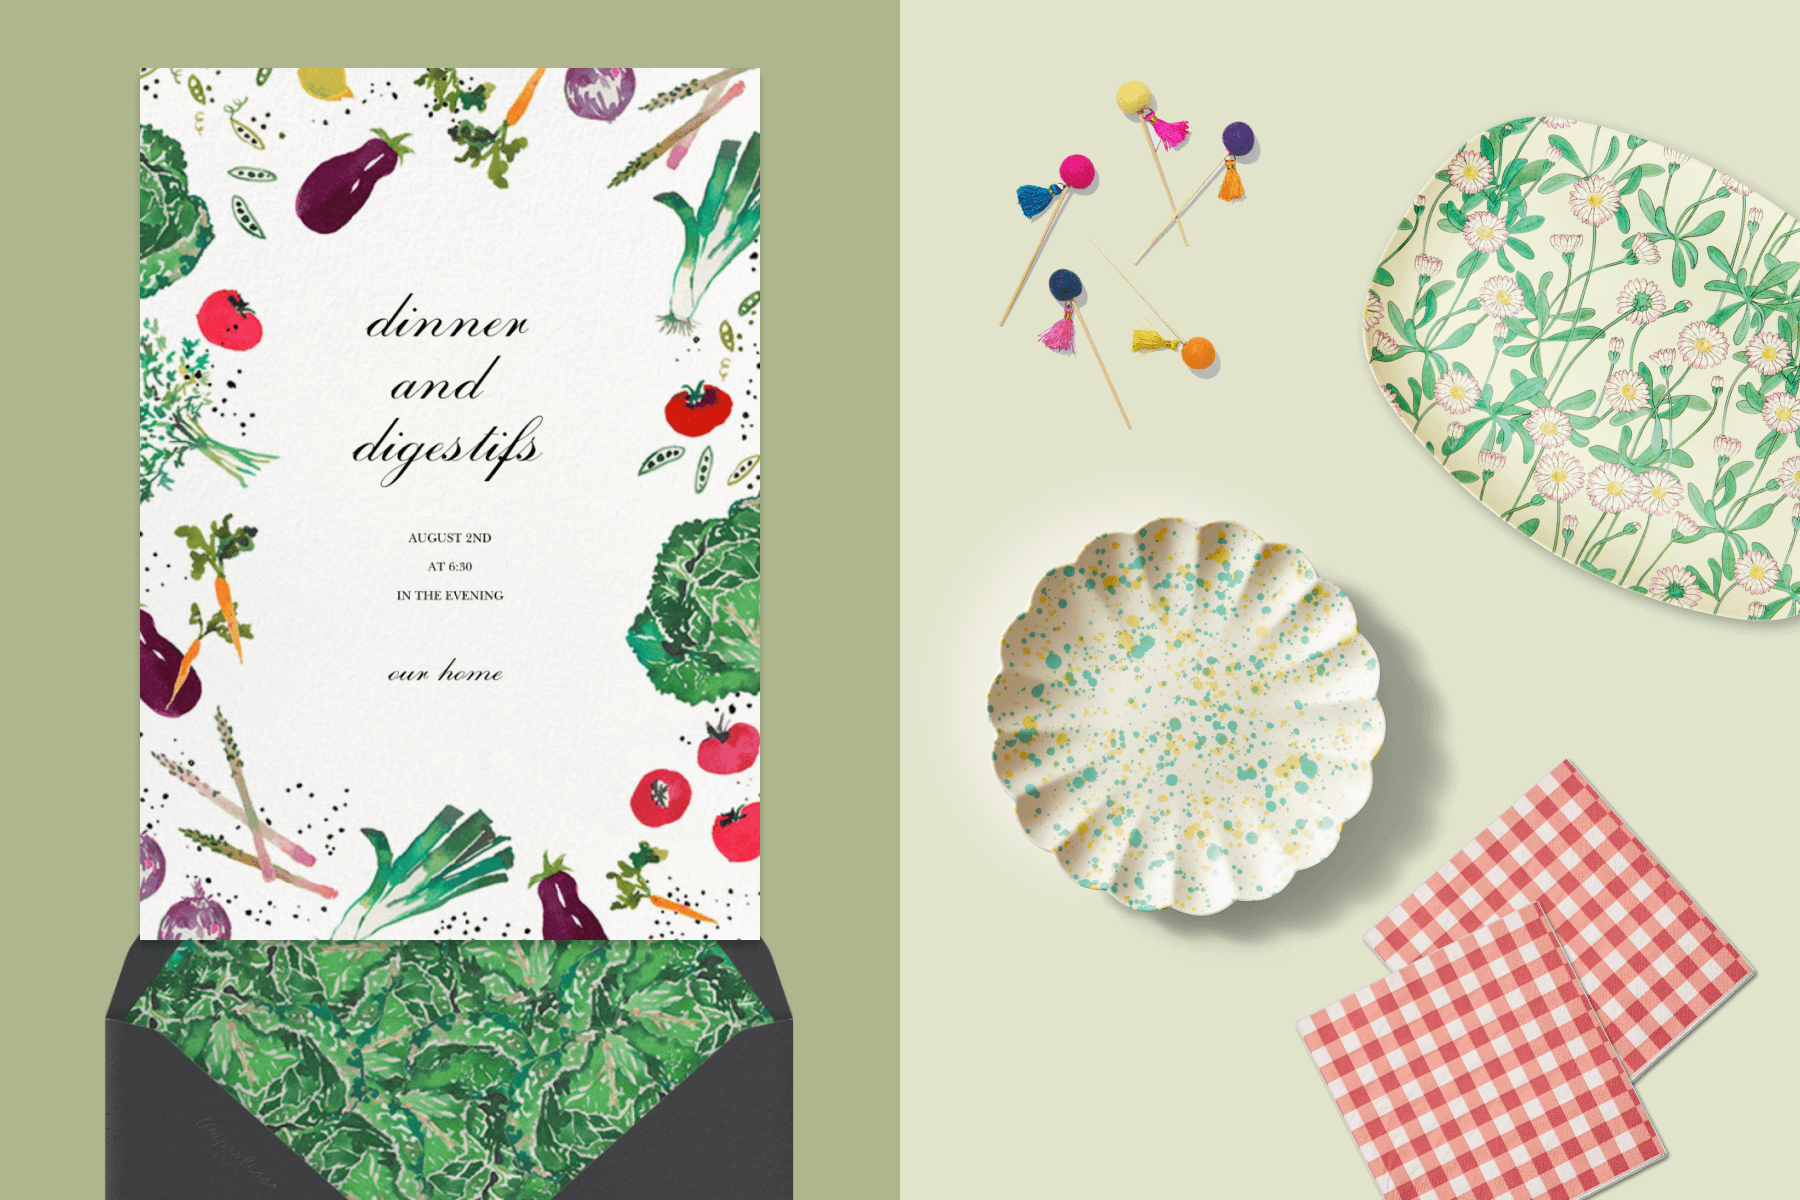 Left: A dinner party invitation featuring watercolor vegetables; Right: Party Shop supplies including plates and napkins.